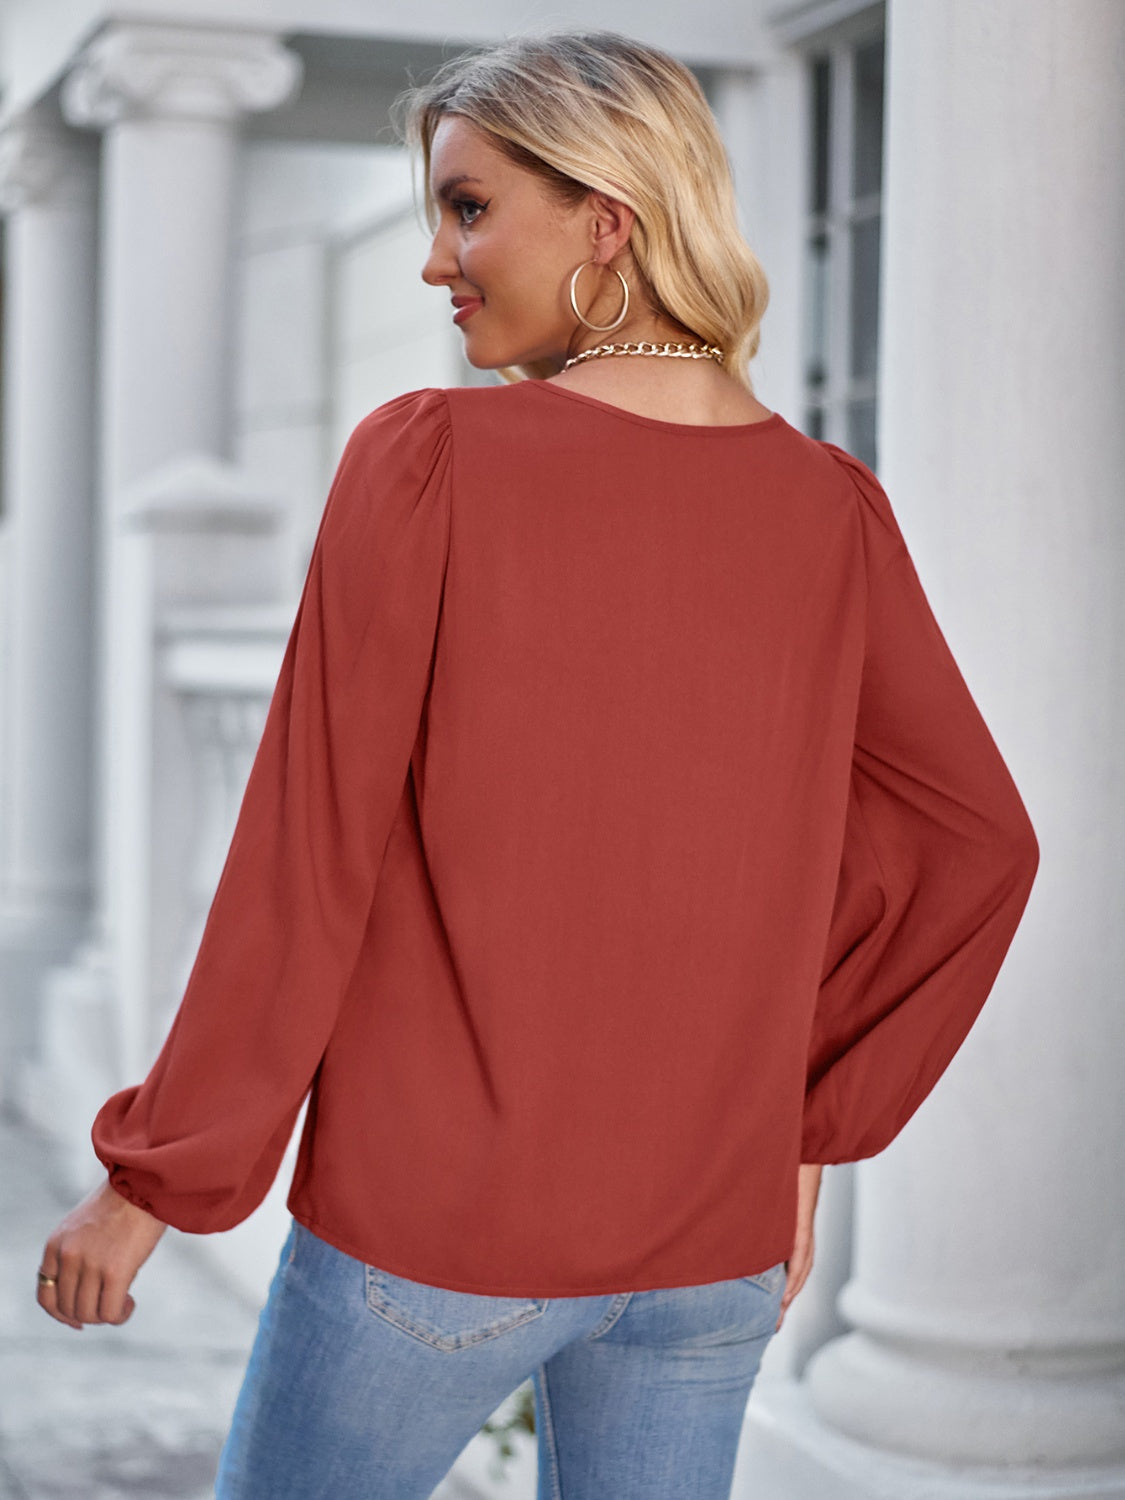 Peach Blossom Neck Puff Sleeve Top | Hypoallergenic - Allergy Friendly - Naturally Free